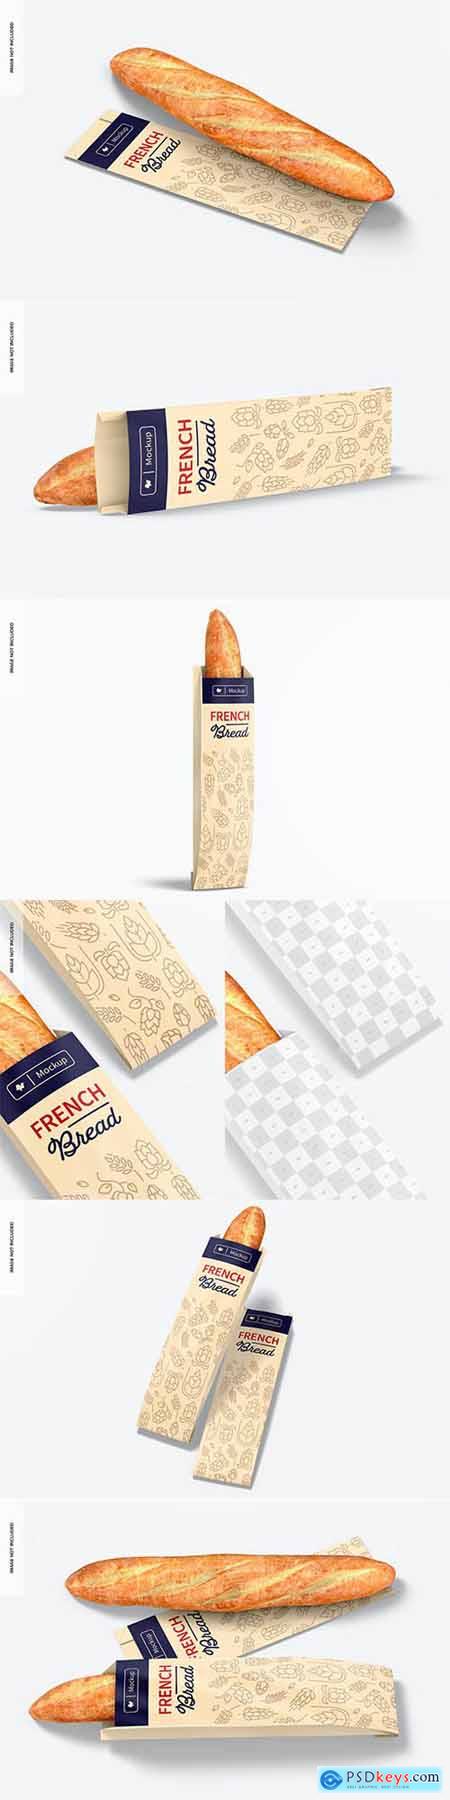 French bread paper bags mockup